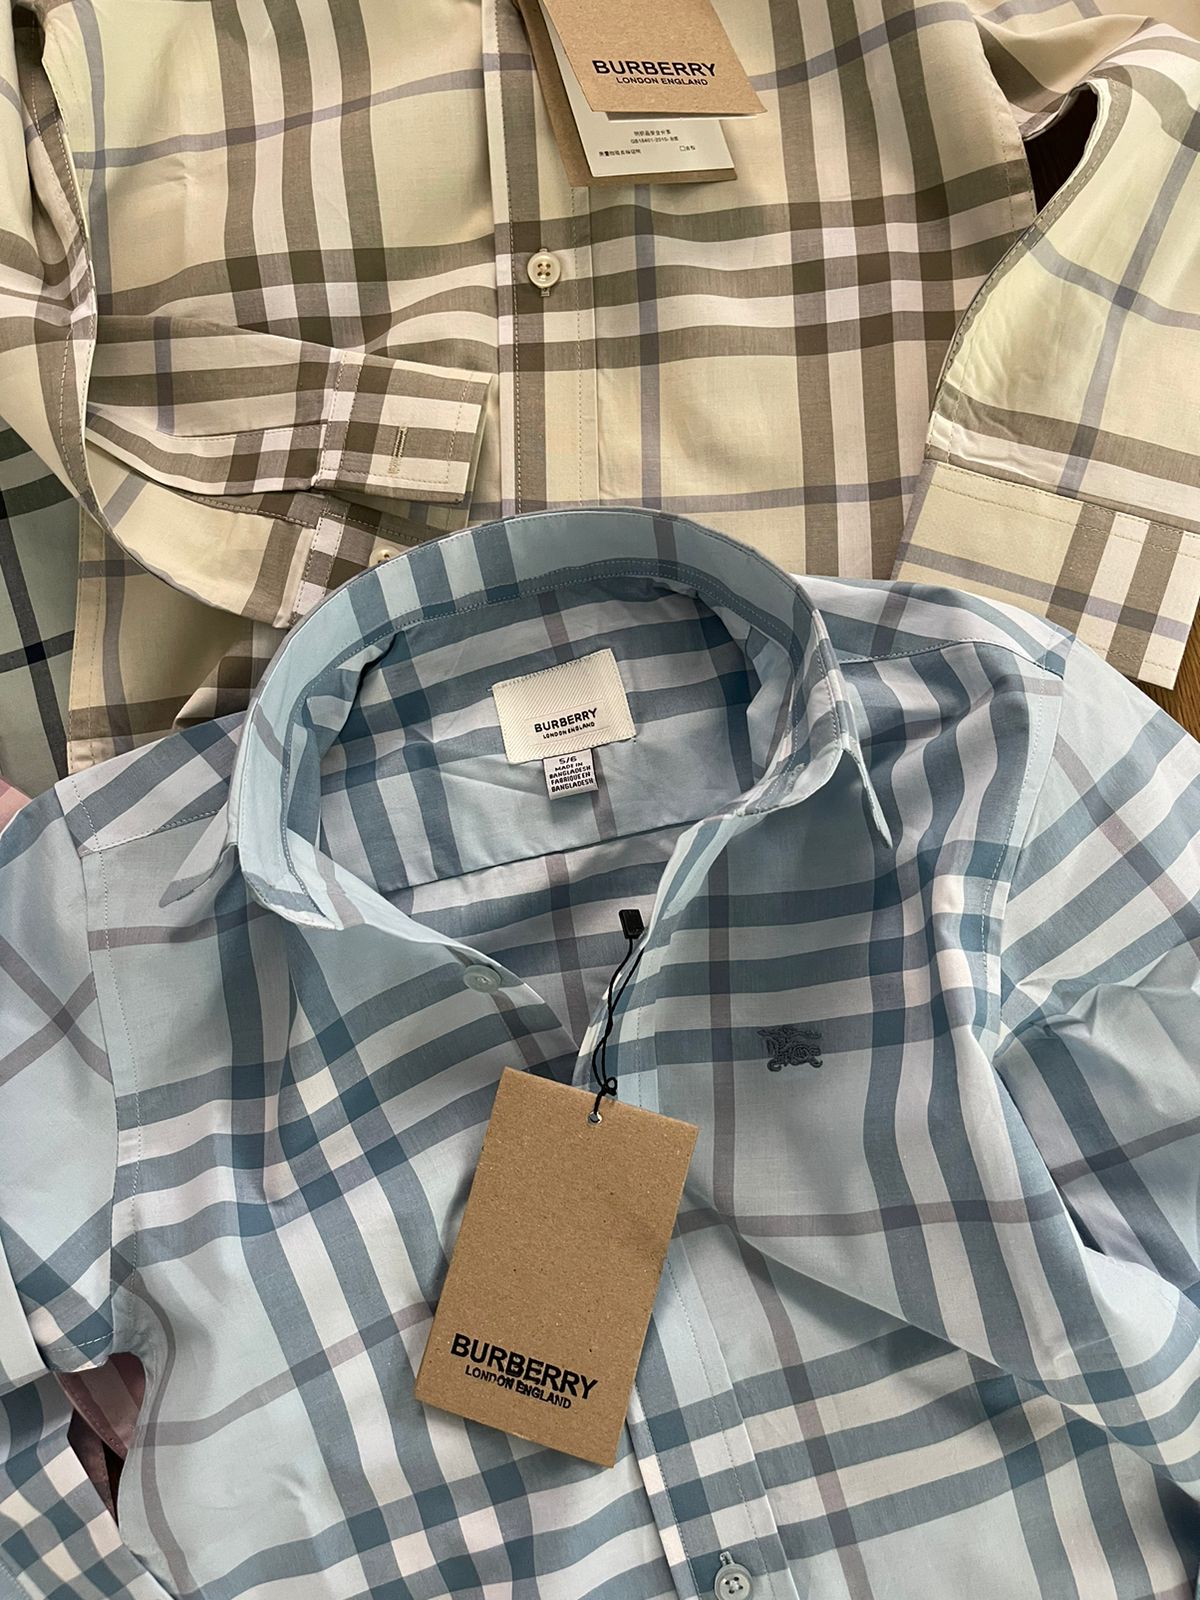 BURBERRY IMPORTED COTTON SHIRTS